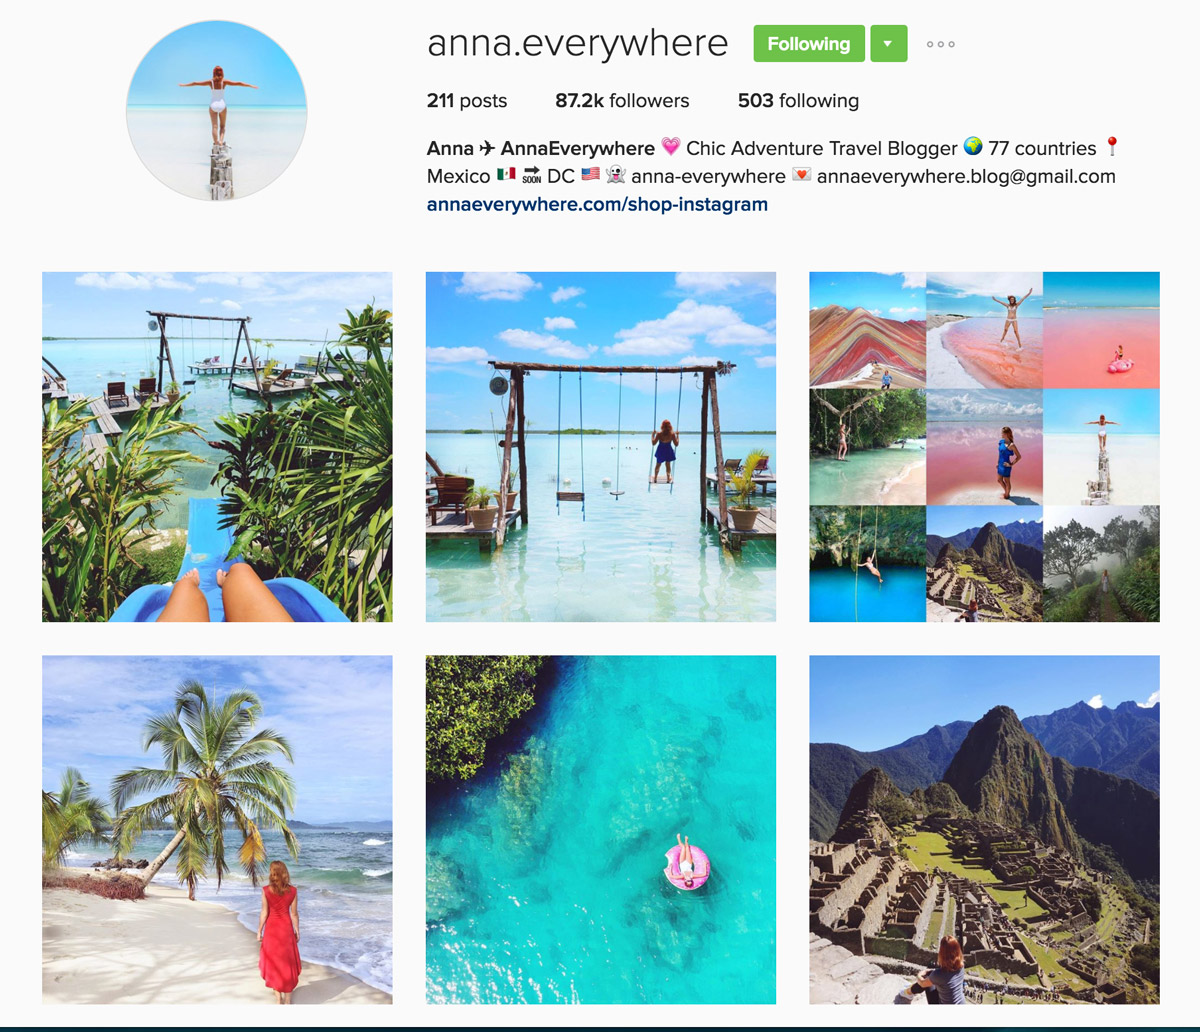 The Top 25 Travel Instagram Accounts To Follow in 2017!